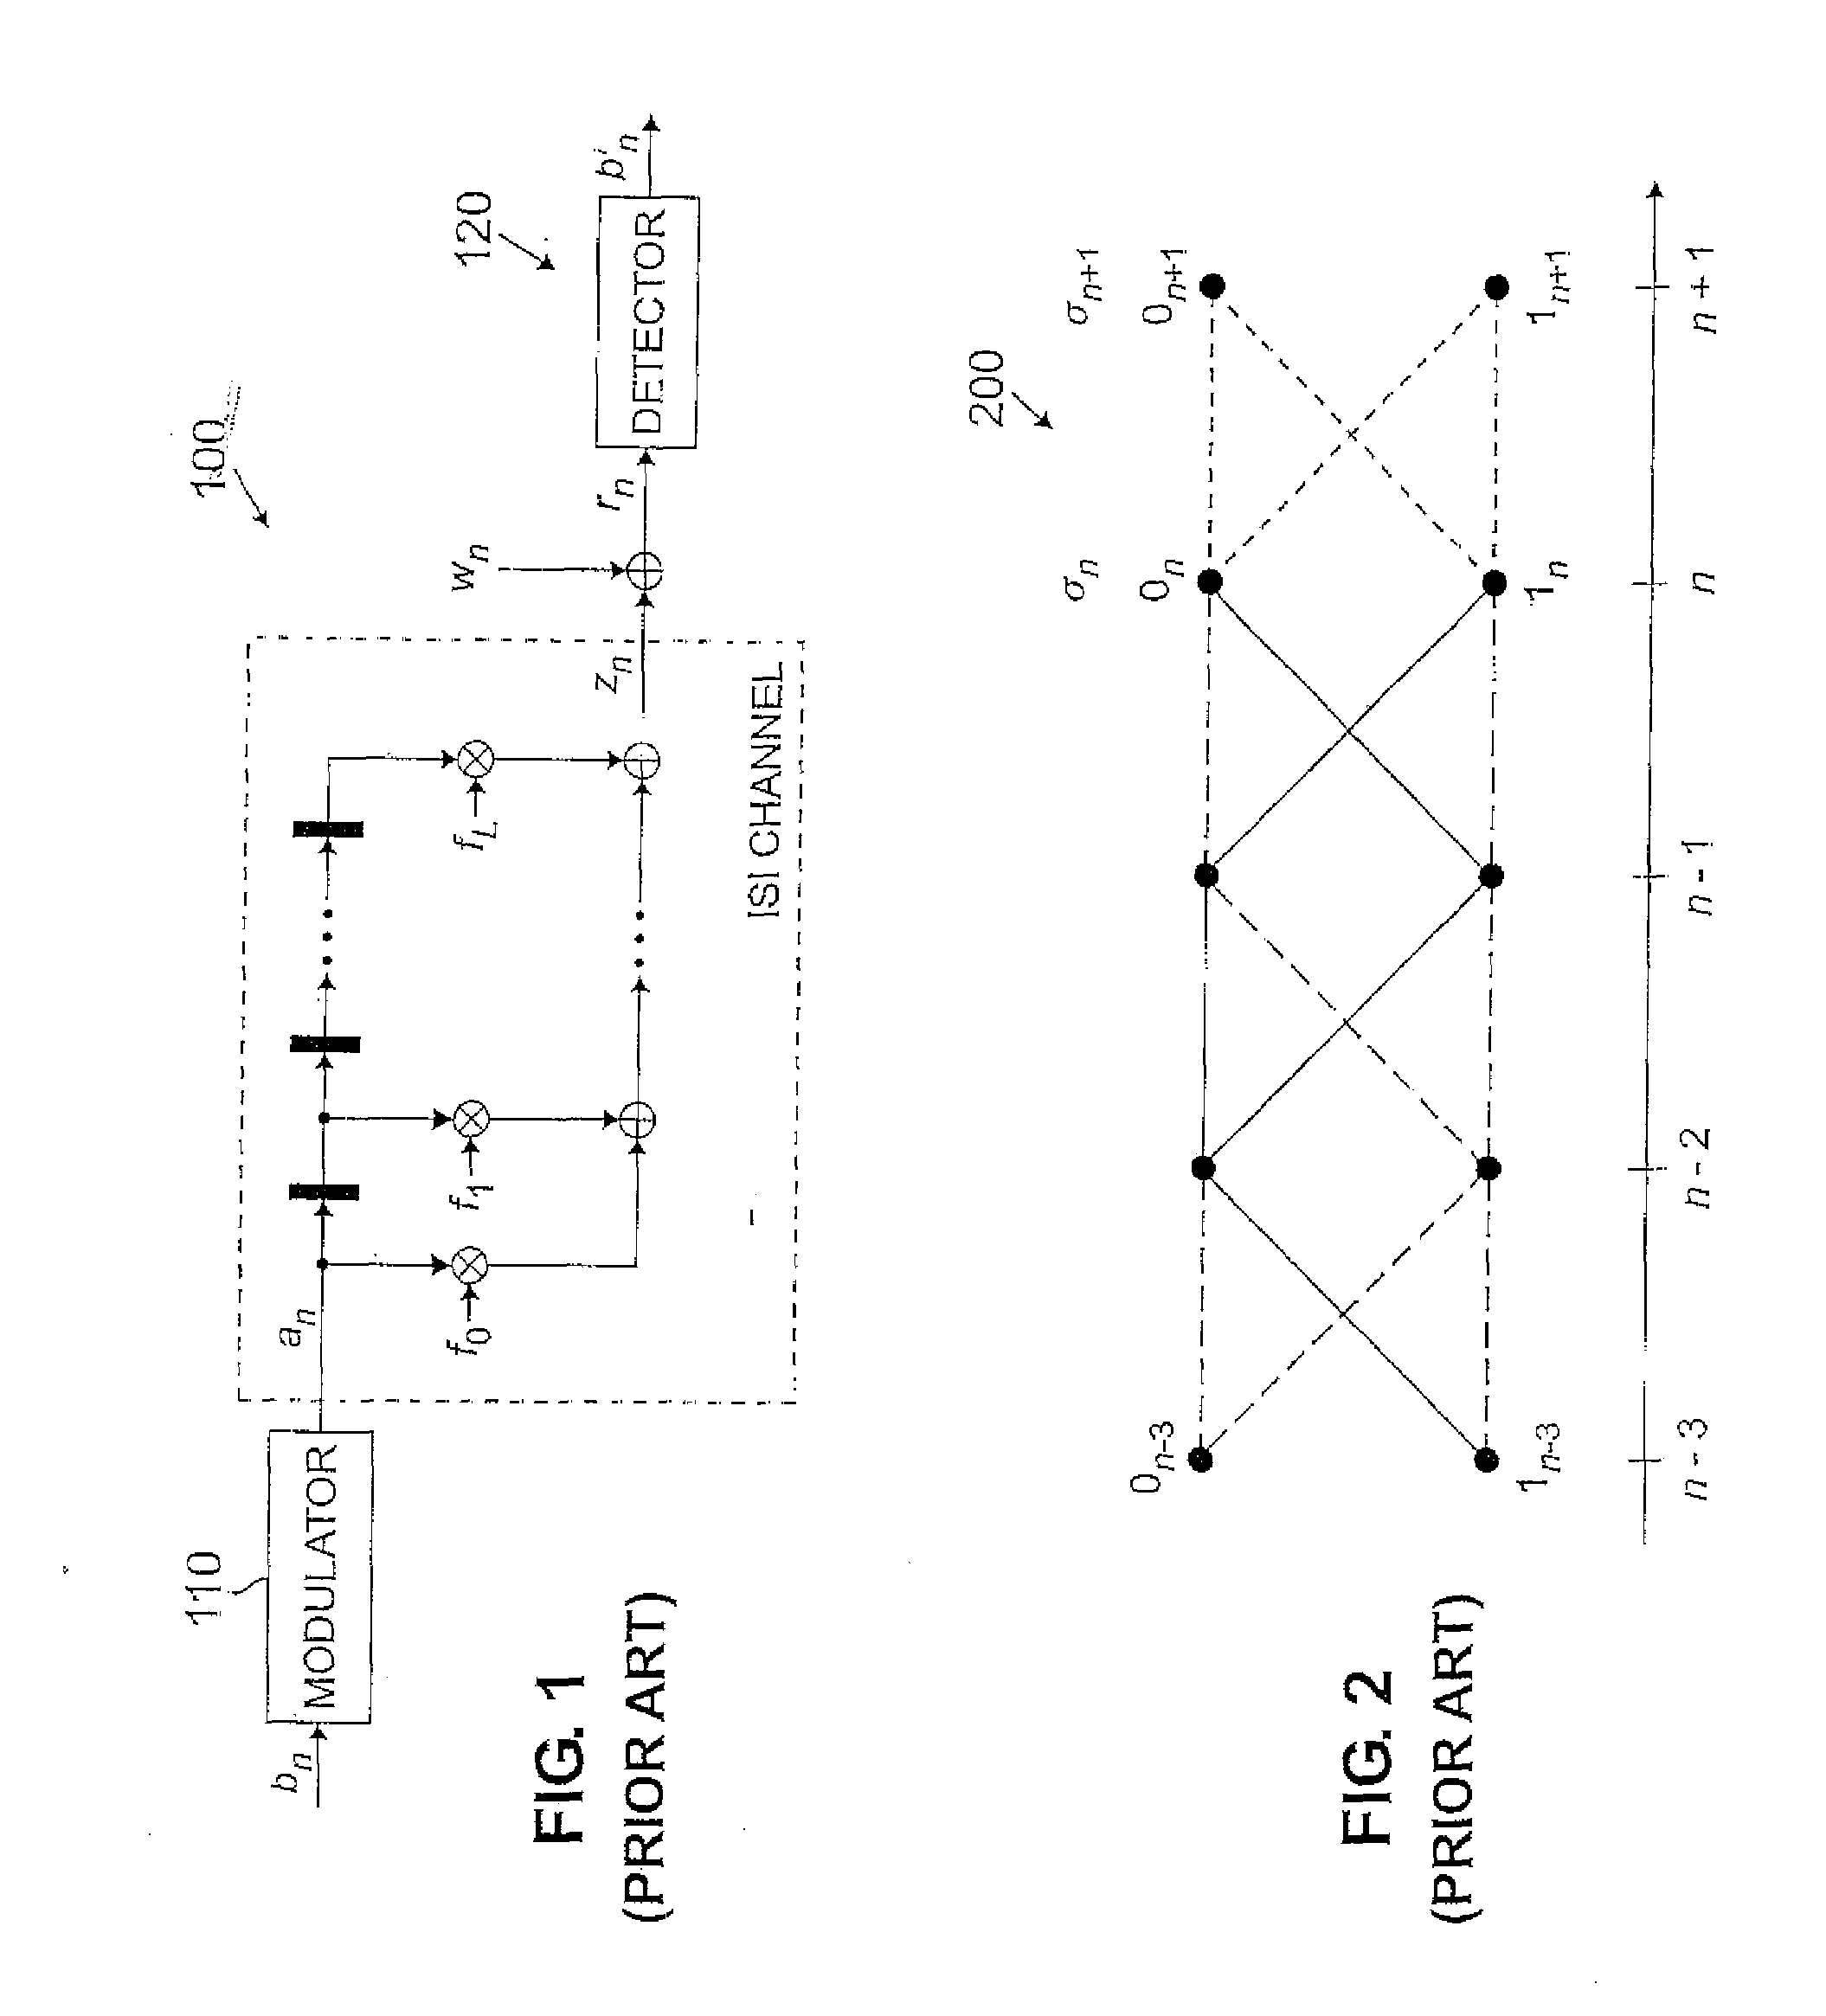 Method and apparatus for precomputation and pipelined selection of branch metrics in a reduced state viterbi detector